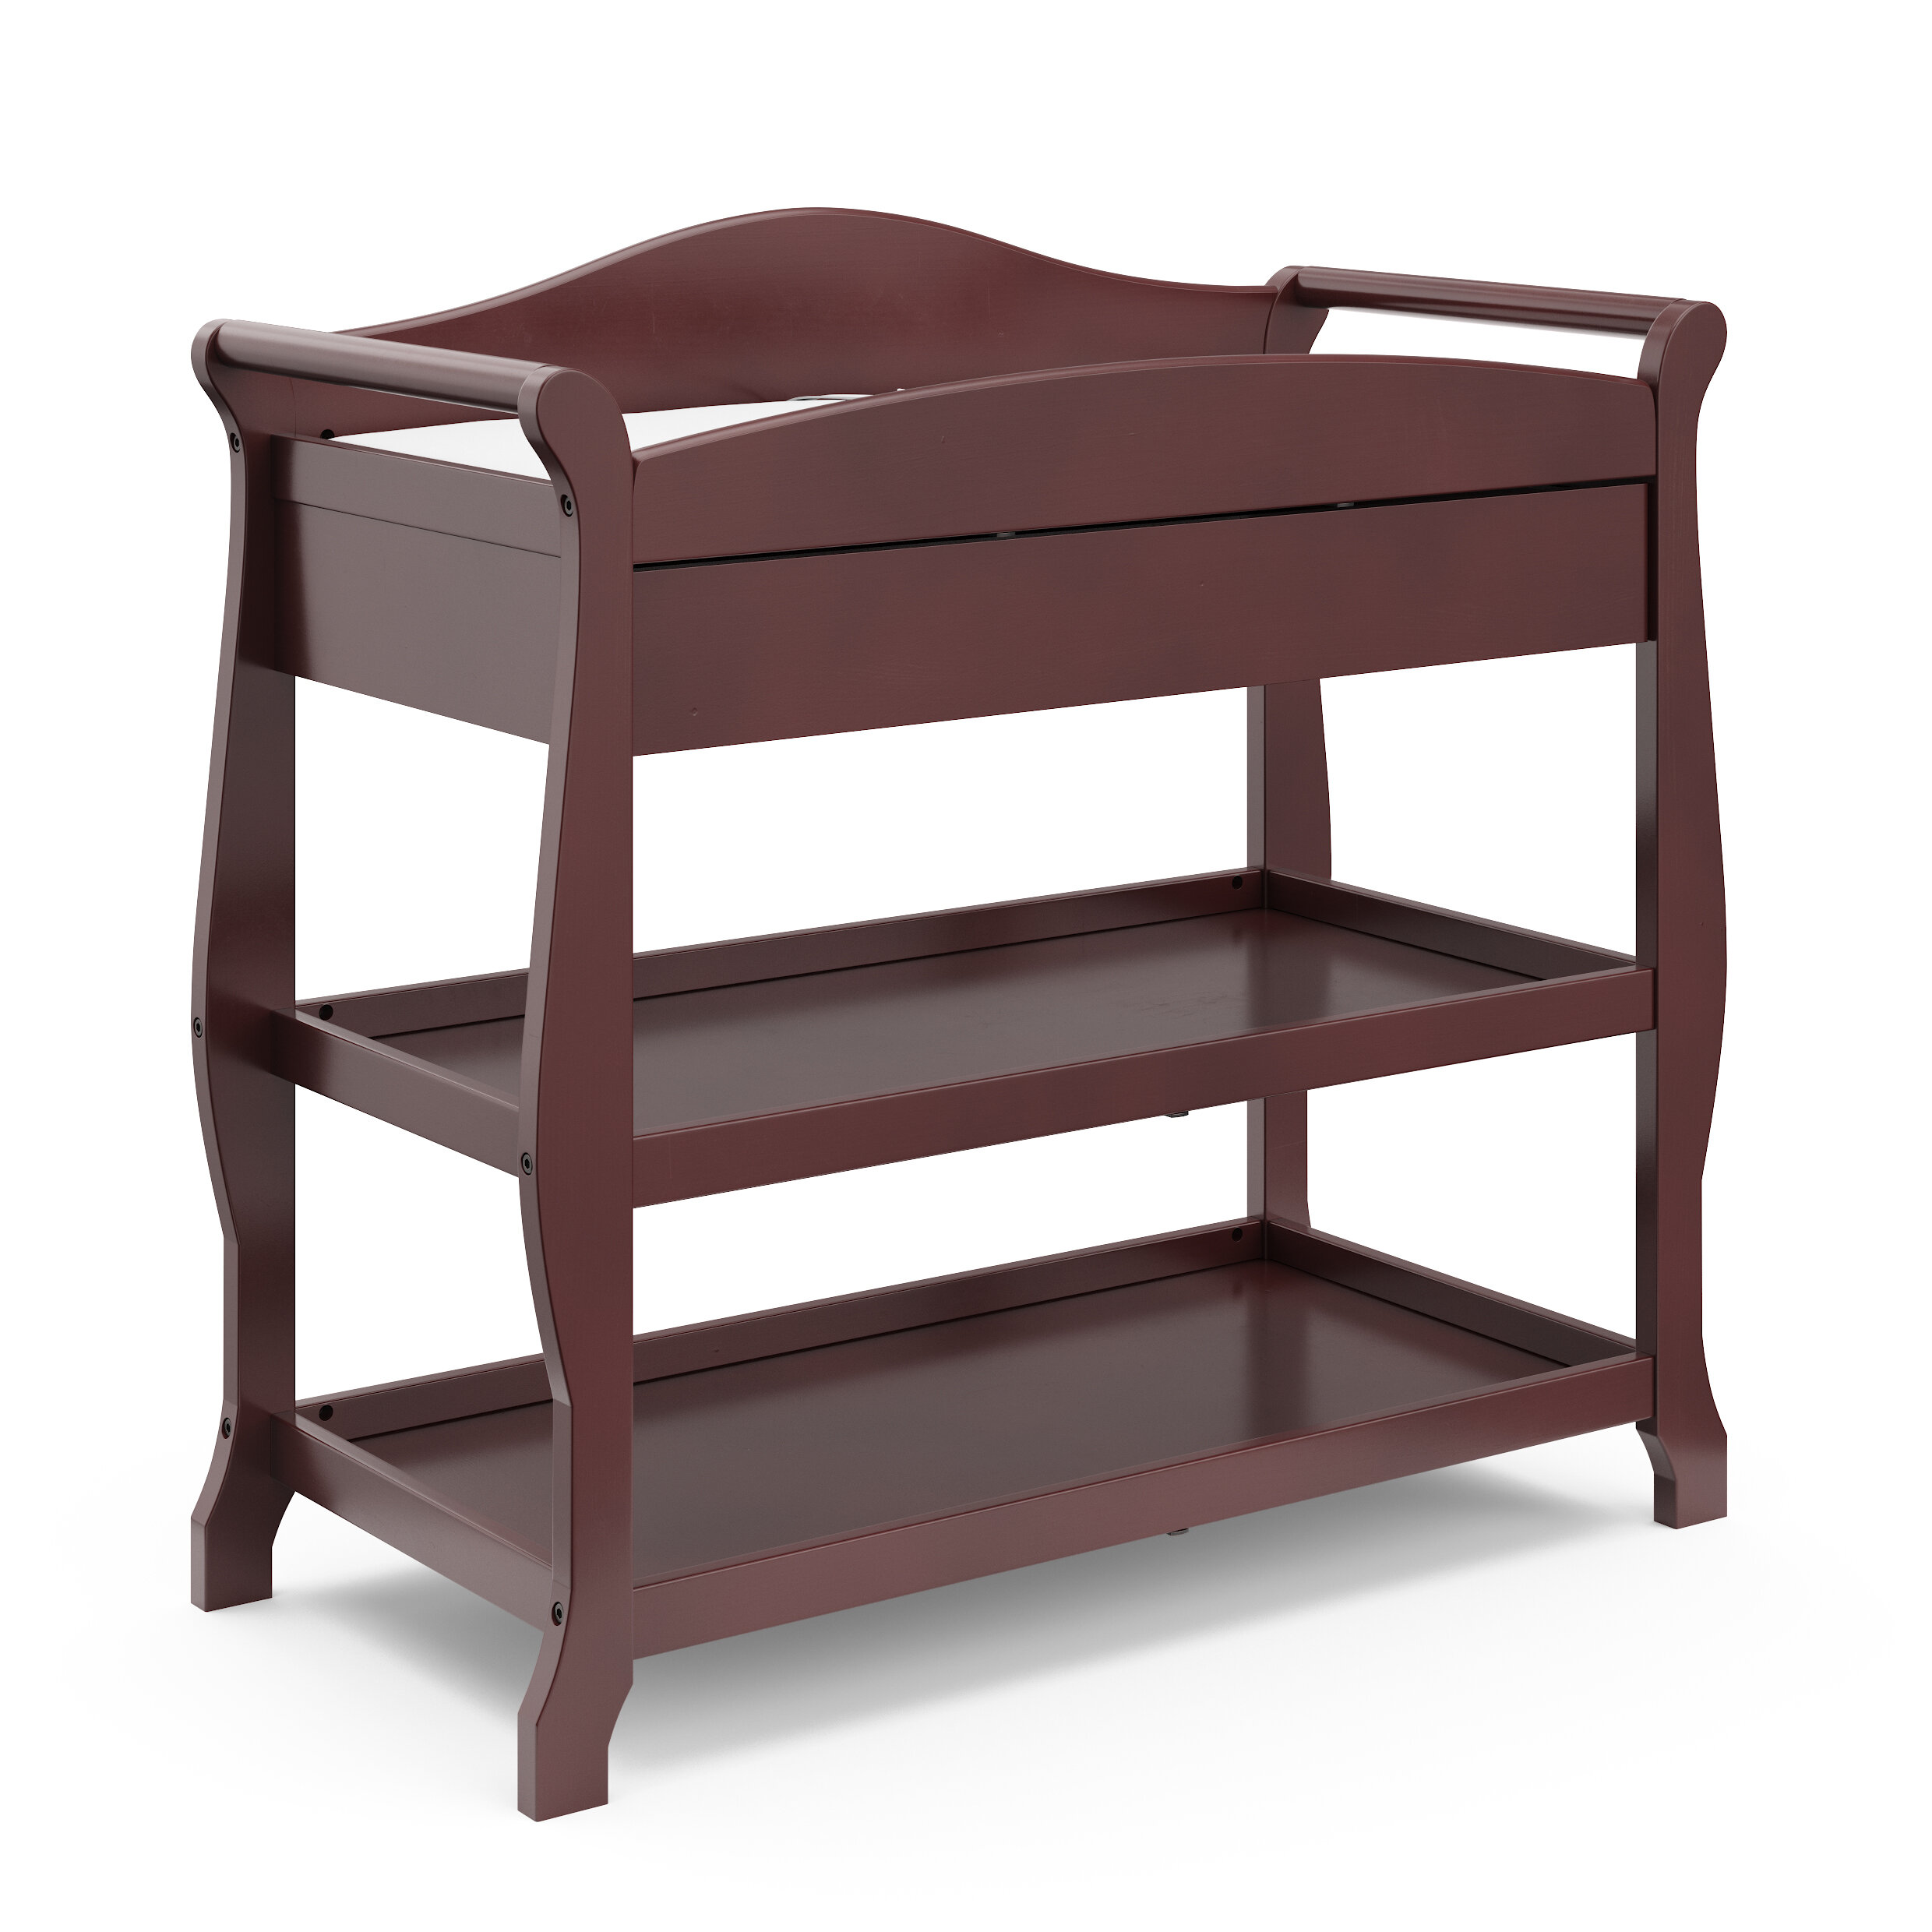 Storkcraft Aspen Changing Table With Pad Reviews Wayfair Ca